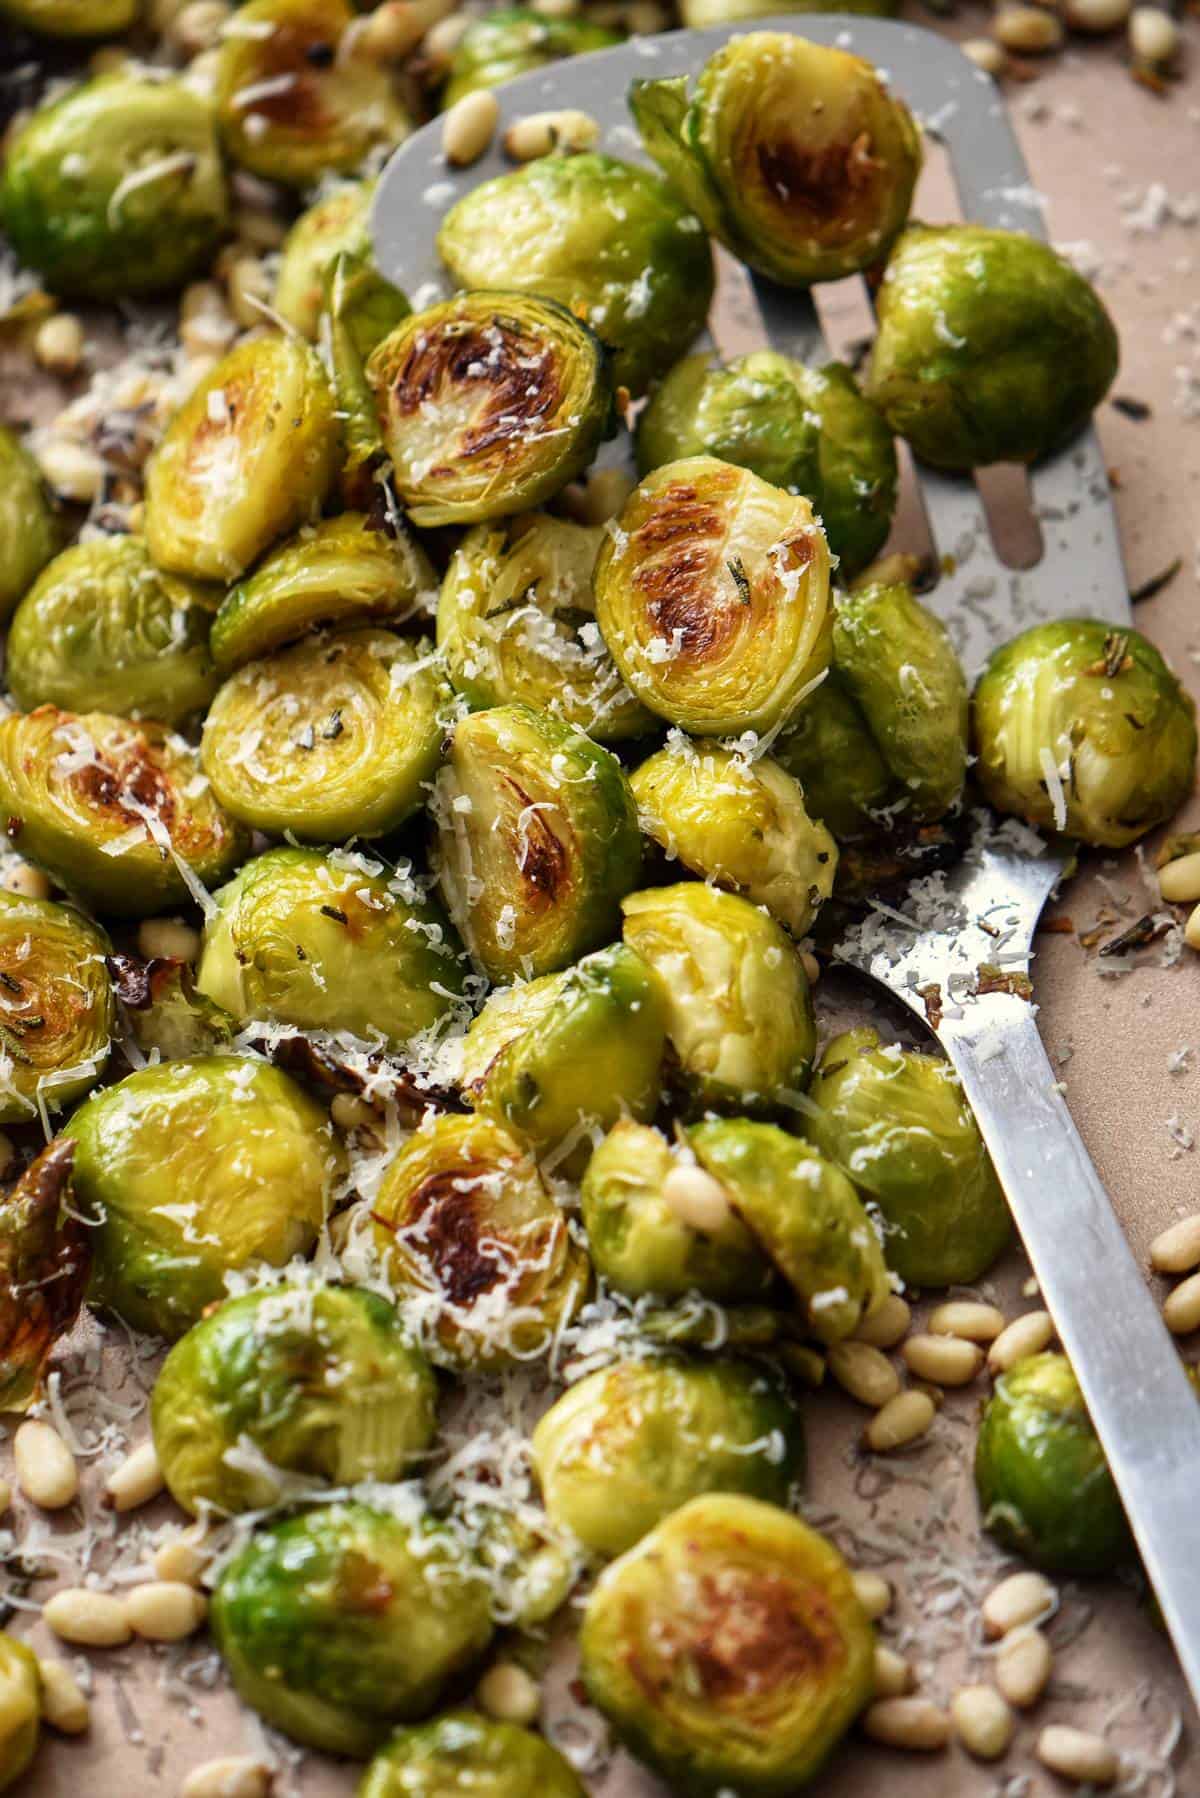 Roasted brussels sprouts with garlic and pine nuts on a sheet pan.